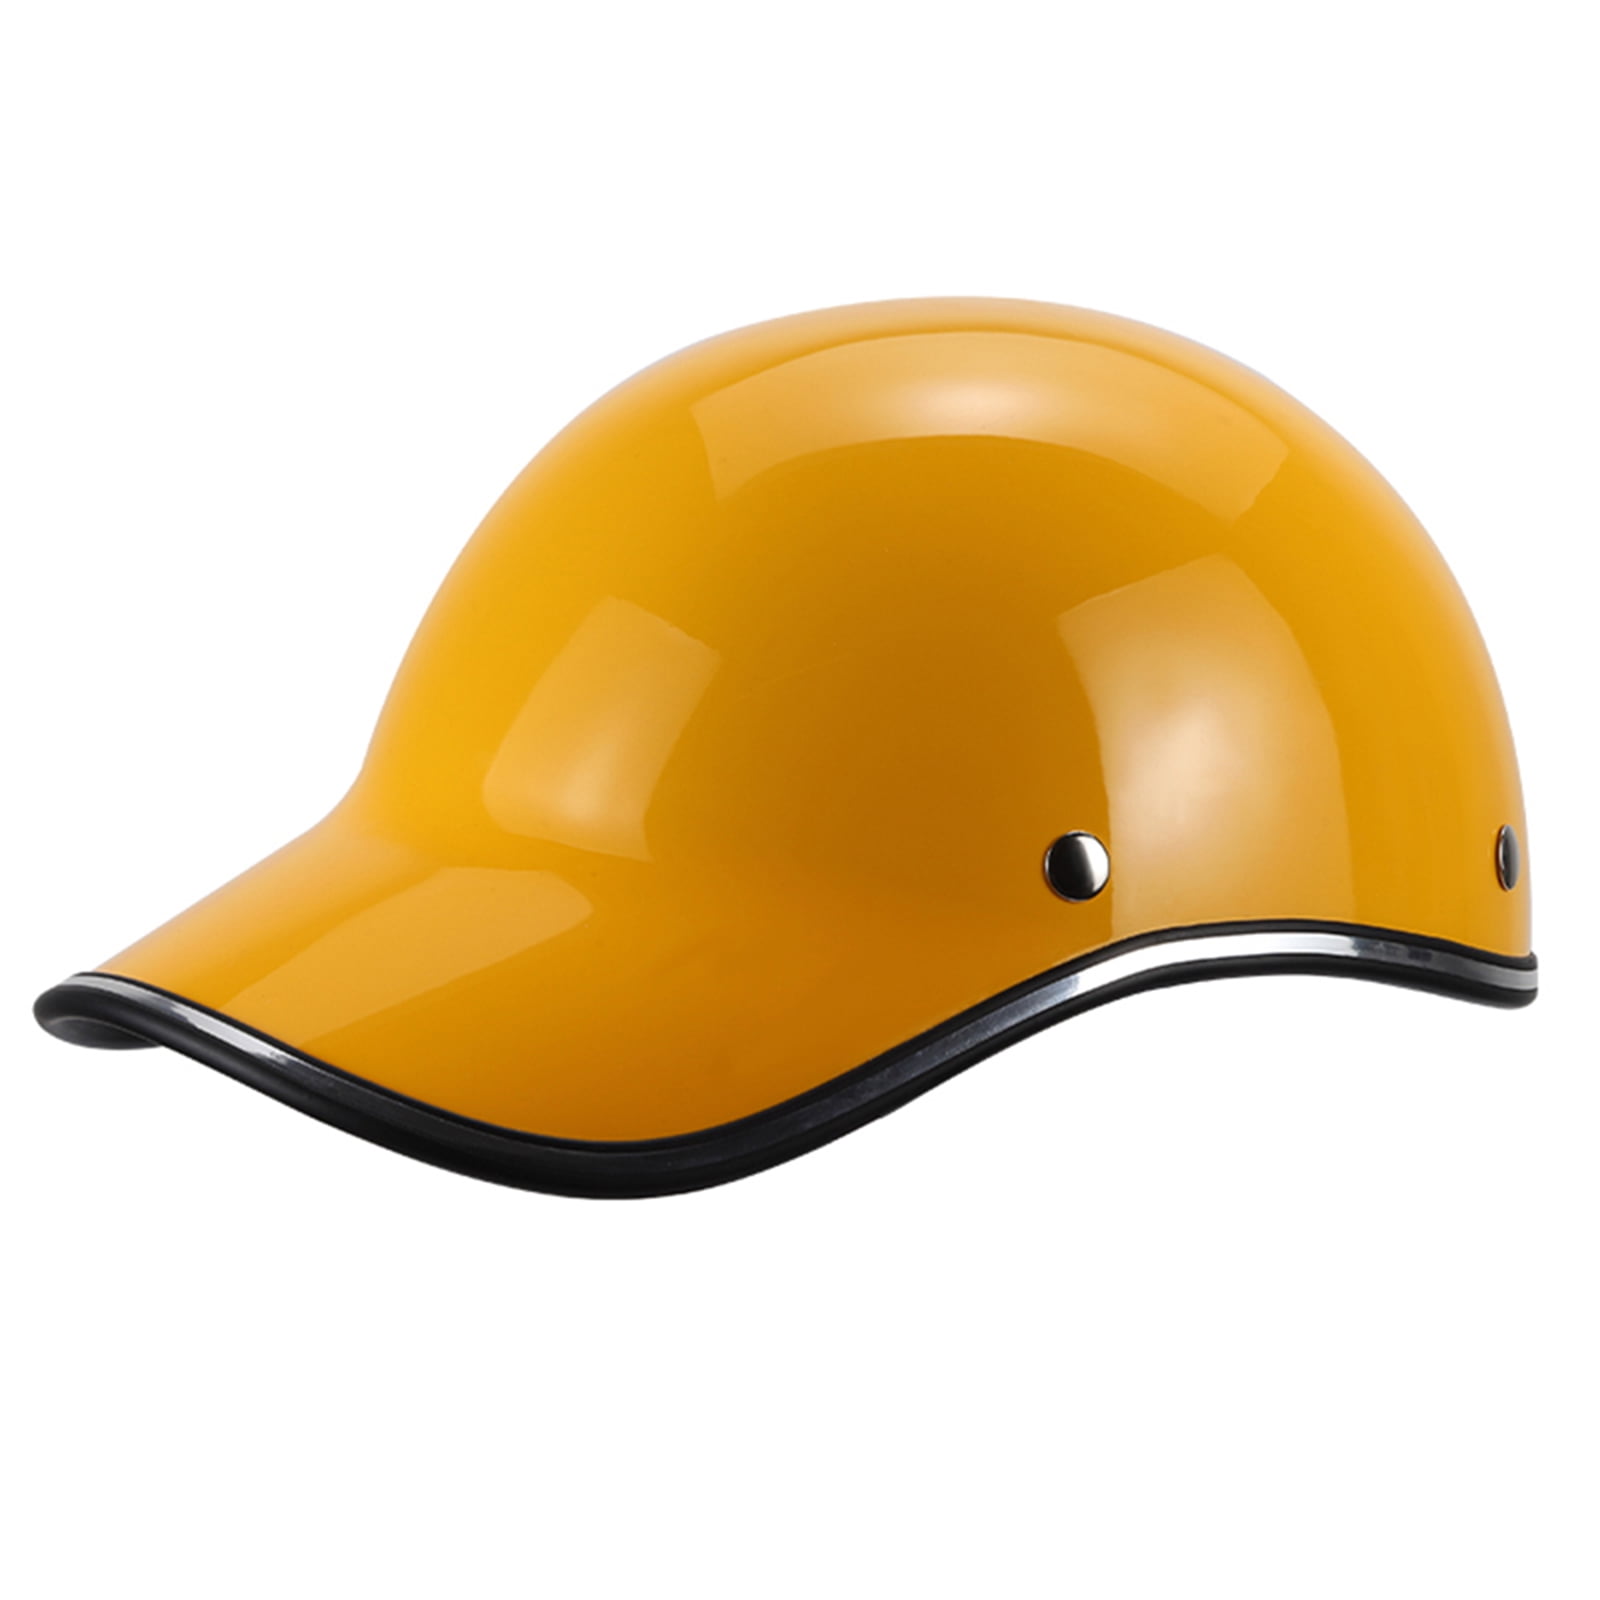 Details about   1 Pc Riding Helmets High Quality Baseball Helmet for Motorcycle Cycling 